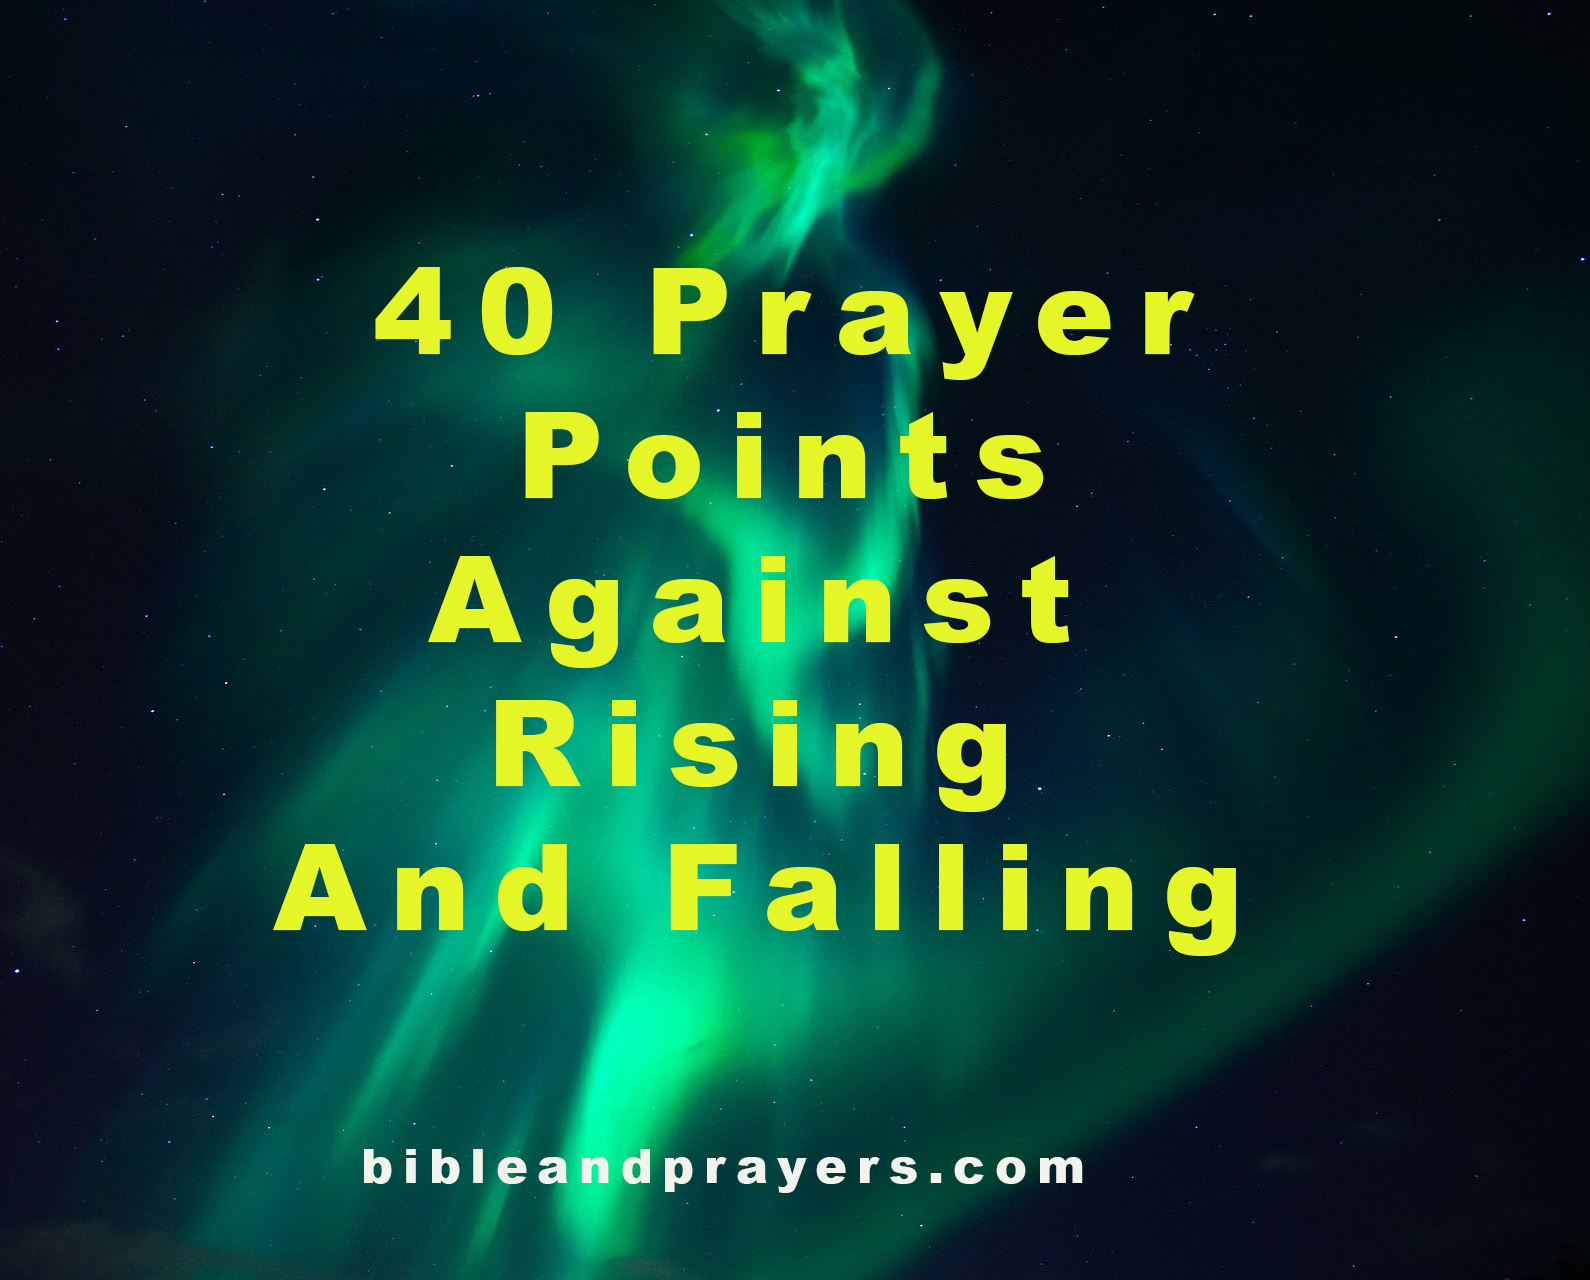 40 Prayer Points Against Rising And Falling